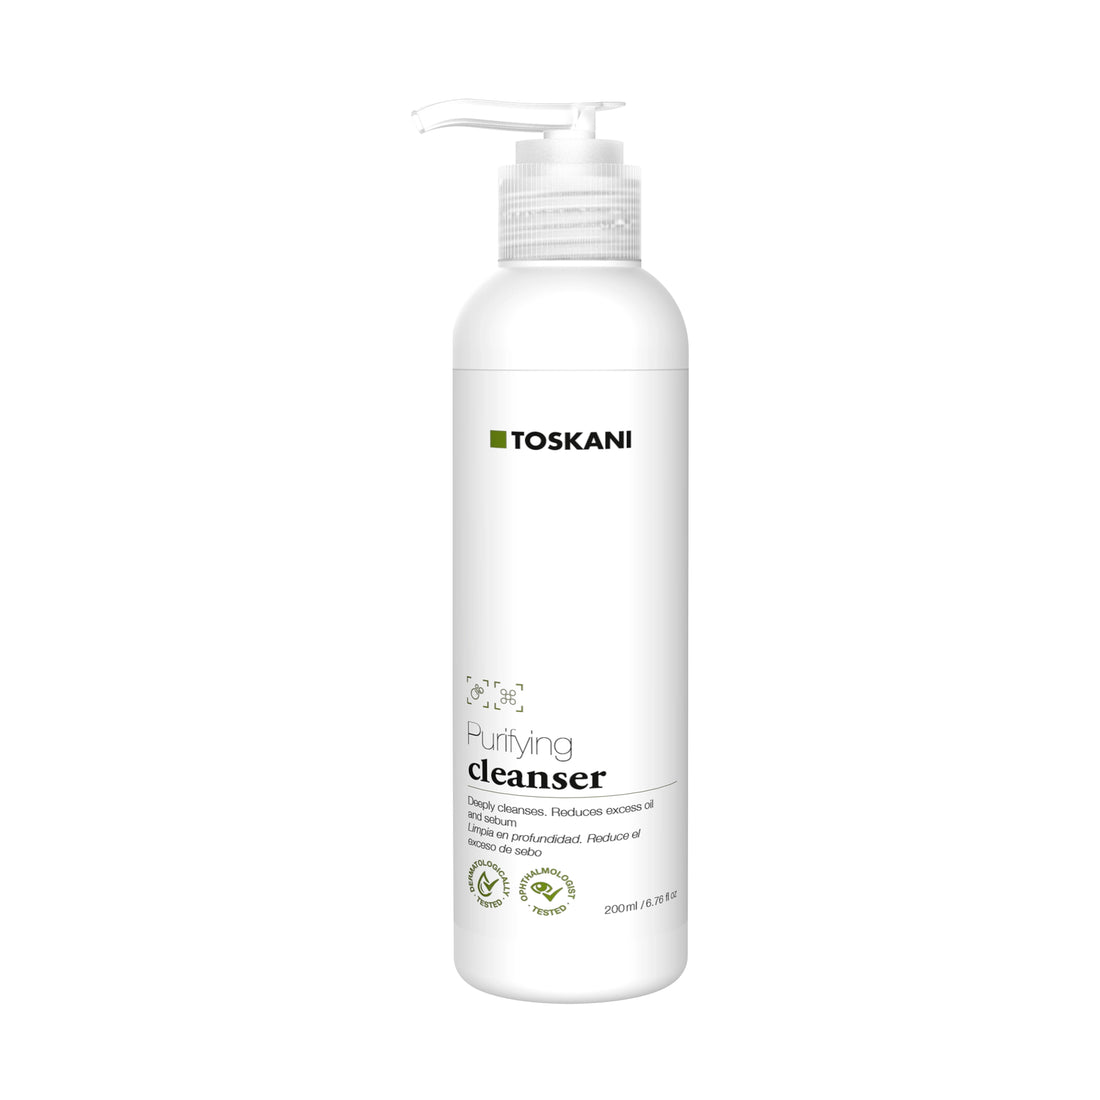 Toskani - Purifying cleanser